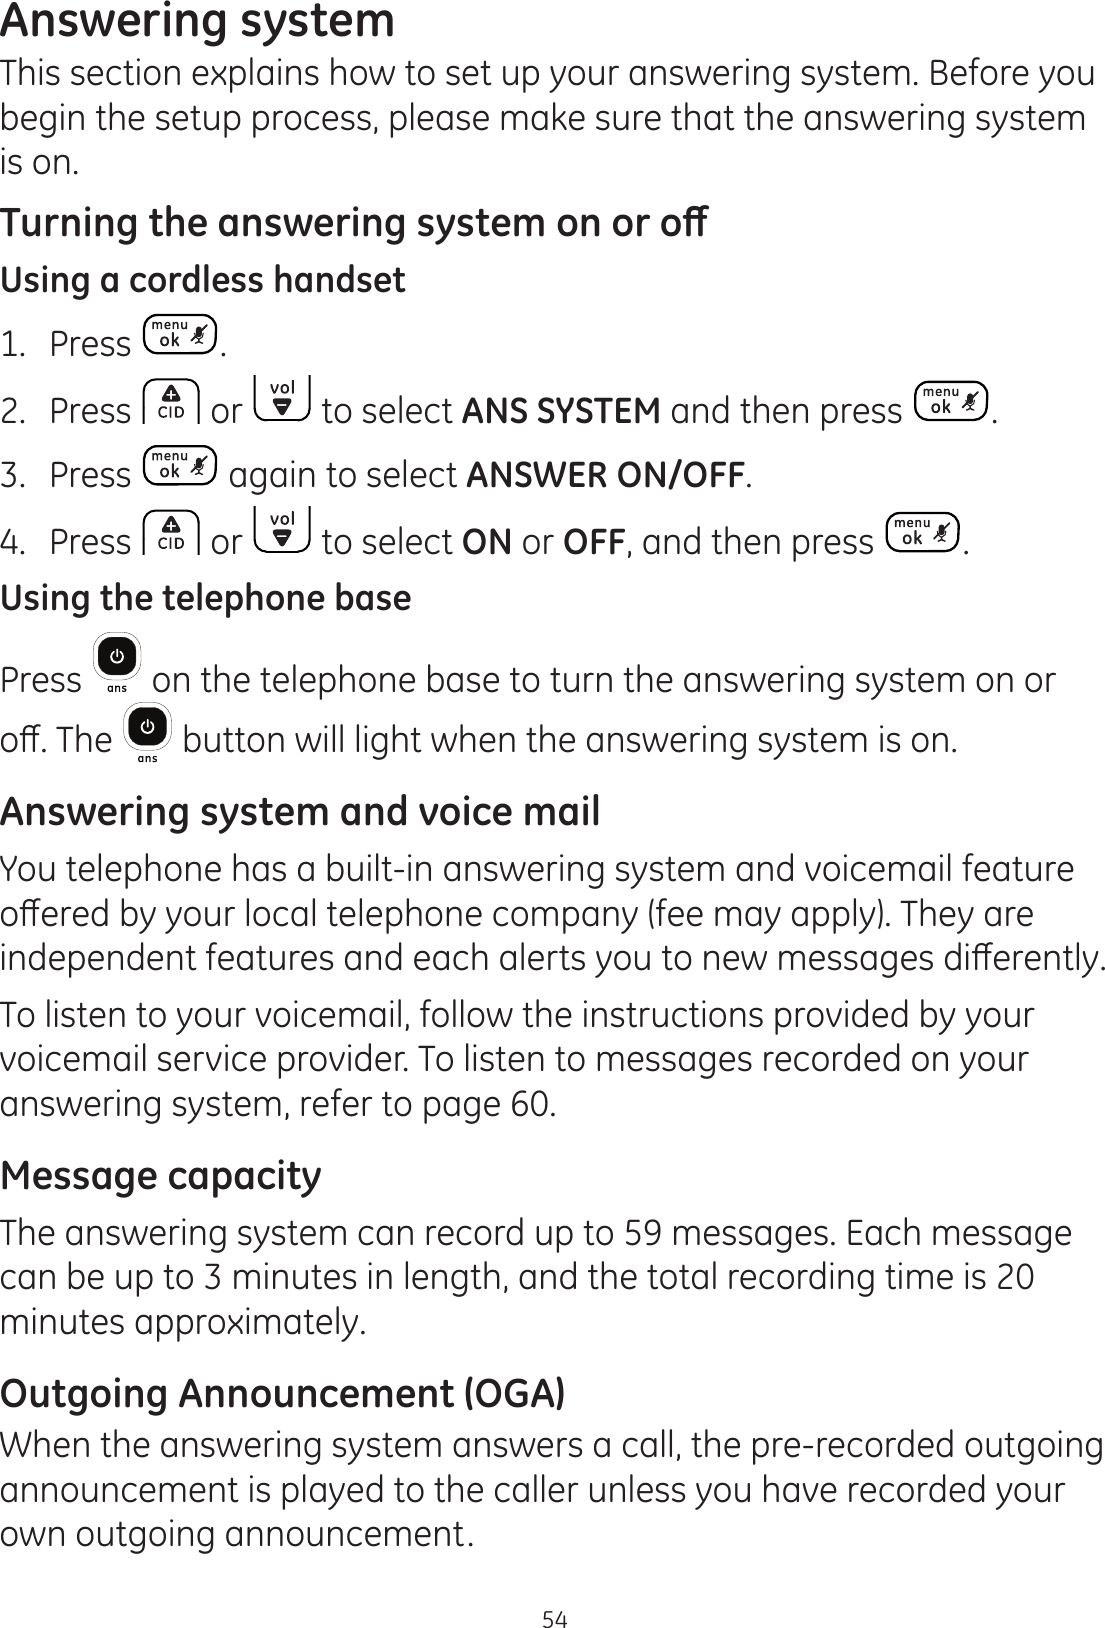 54Answering systemThis section explains how to set up your answering system. Before you begin the setup process, please make sure that the answering system is on. 7XUQLQJWKHDQVZHULQJV\VWHPRQRURȹUsing a cordless handset1.  Press .2.  Press   or   to select ANS SYSTEM and then press  . 3.  Press   again to select ANSWER ON/OFF.4.  Press   or   to select ON or OFF, and then press  .Using the telephone basePress   on the telephone base to turn the answering system on or RȺ7KH  button will light when the answering system is on. Answering system and voice mailYou telephone has a built-in answering system and voicemail feature RȺHUHGE\\RXUORFDOWHOHSKRQHFRPSDQ\IHHPD\DSSO\7KH\DUHLQGHSHQGHQWIHDWXUHVDQGHDFKDOHUWV\RXWRQHZPHVVDJHVGLȺHUHQWO\To listen to your voicemail, follow the instructions provided by your voicemail service provider. To listen to messages recorded on your answering system, refer to page 60.Message capacityThe answering system can record up to 59 messages. Each message can be up to 3 minutes in length, and the total recording time is 20 minutes approximately. Outgoing Announcement (OGA)When the answering system answers a call, the pre-recorded outgoing announcement is played to the caller unless you have recorded your own outgoing announcement.